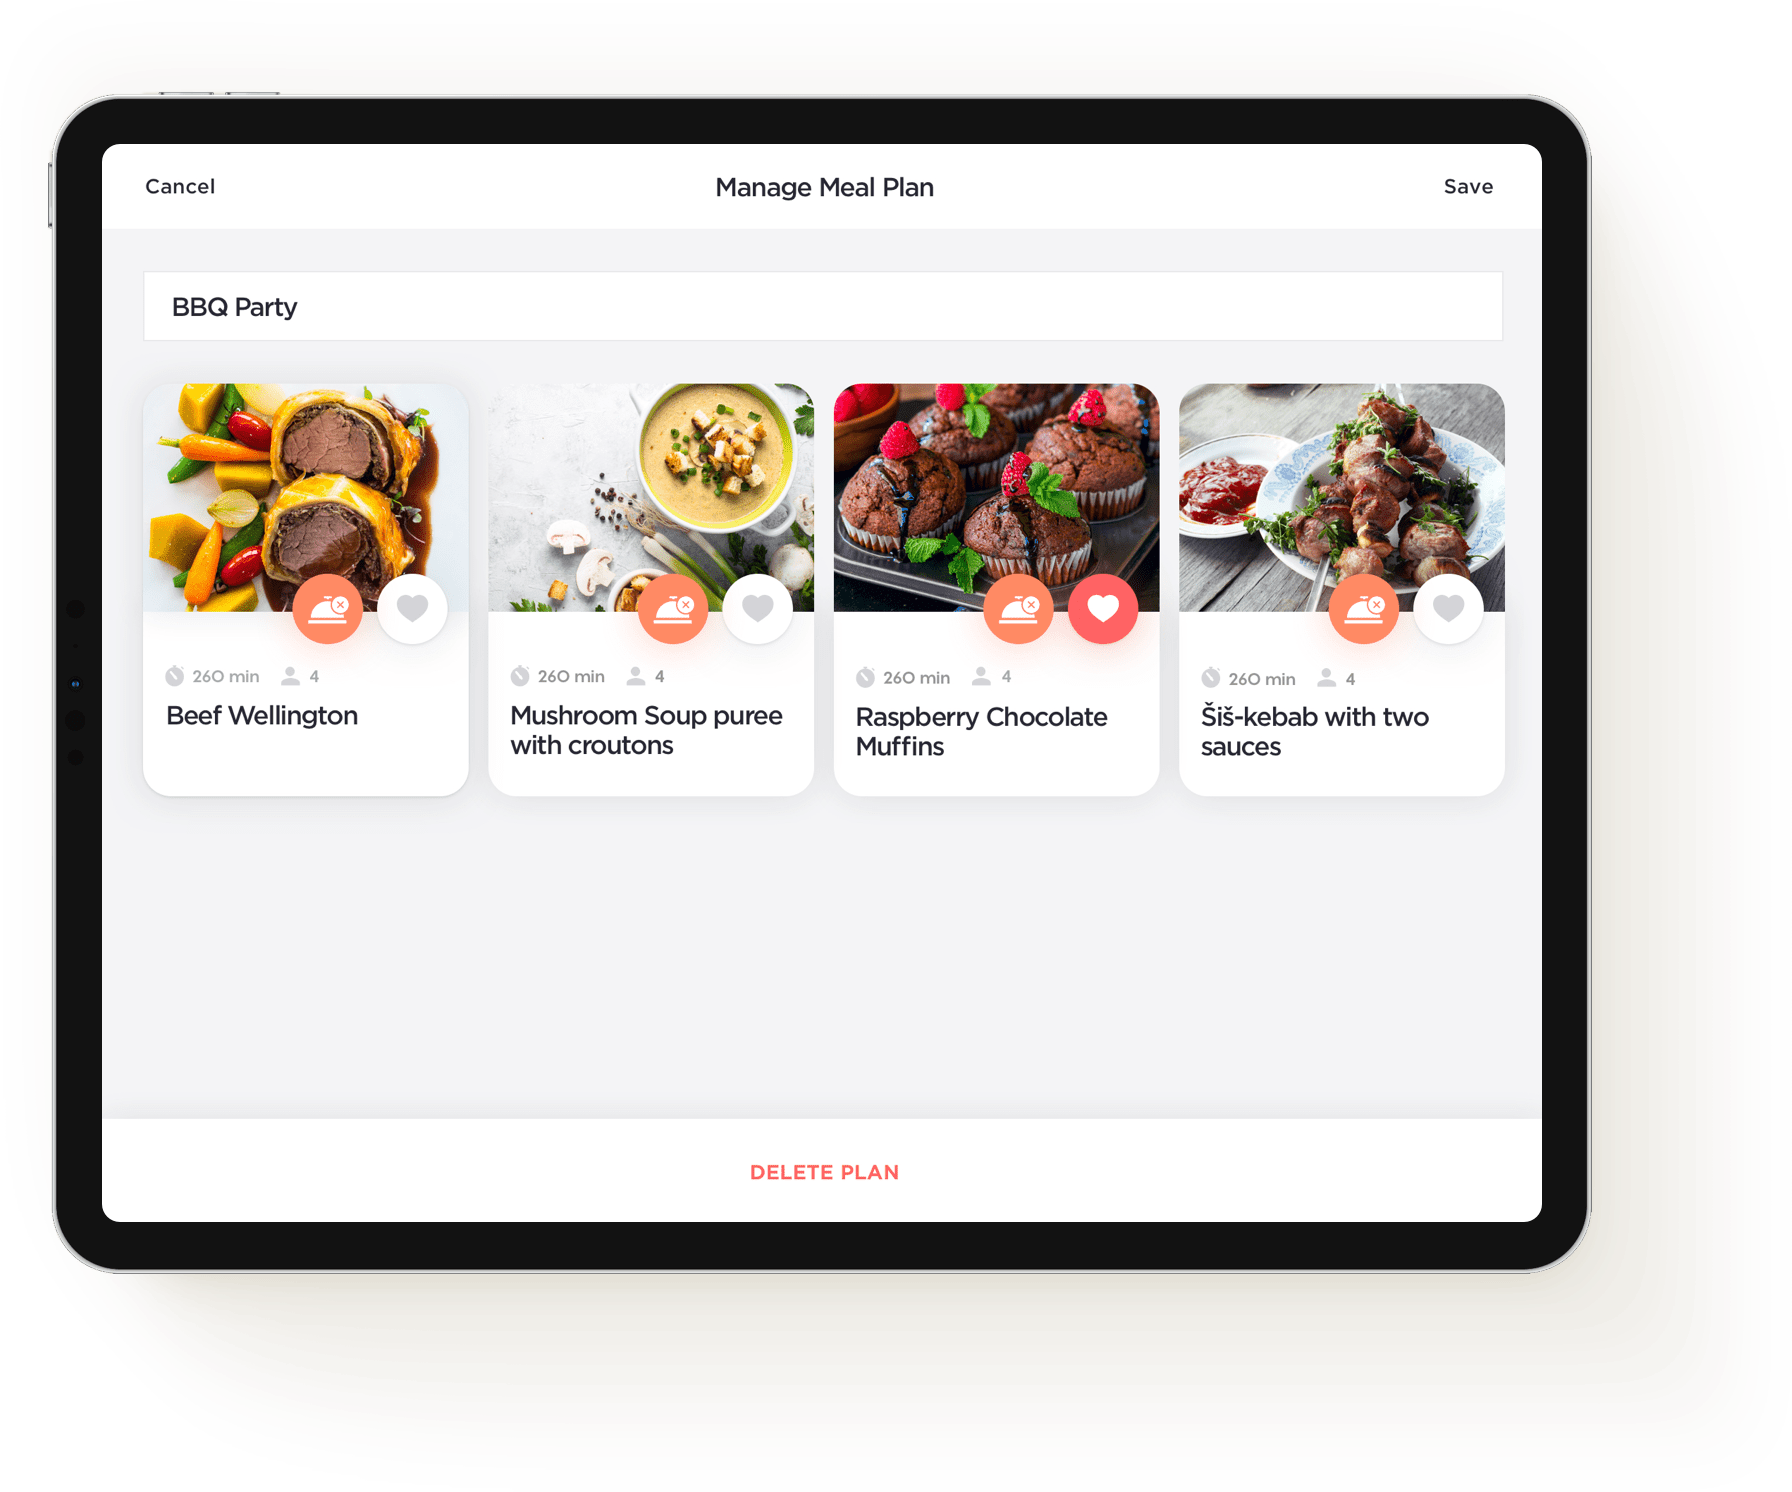 Yummy recipes manage meal plans